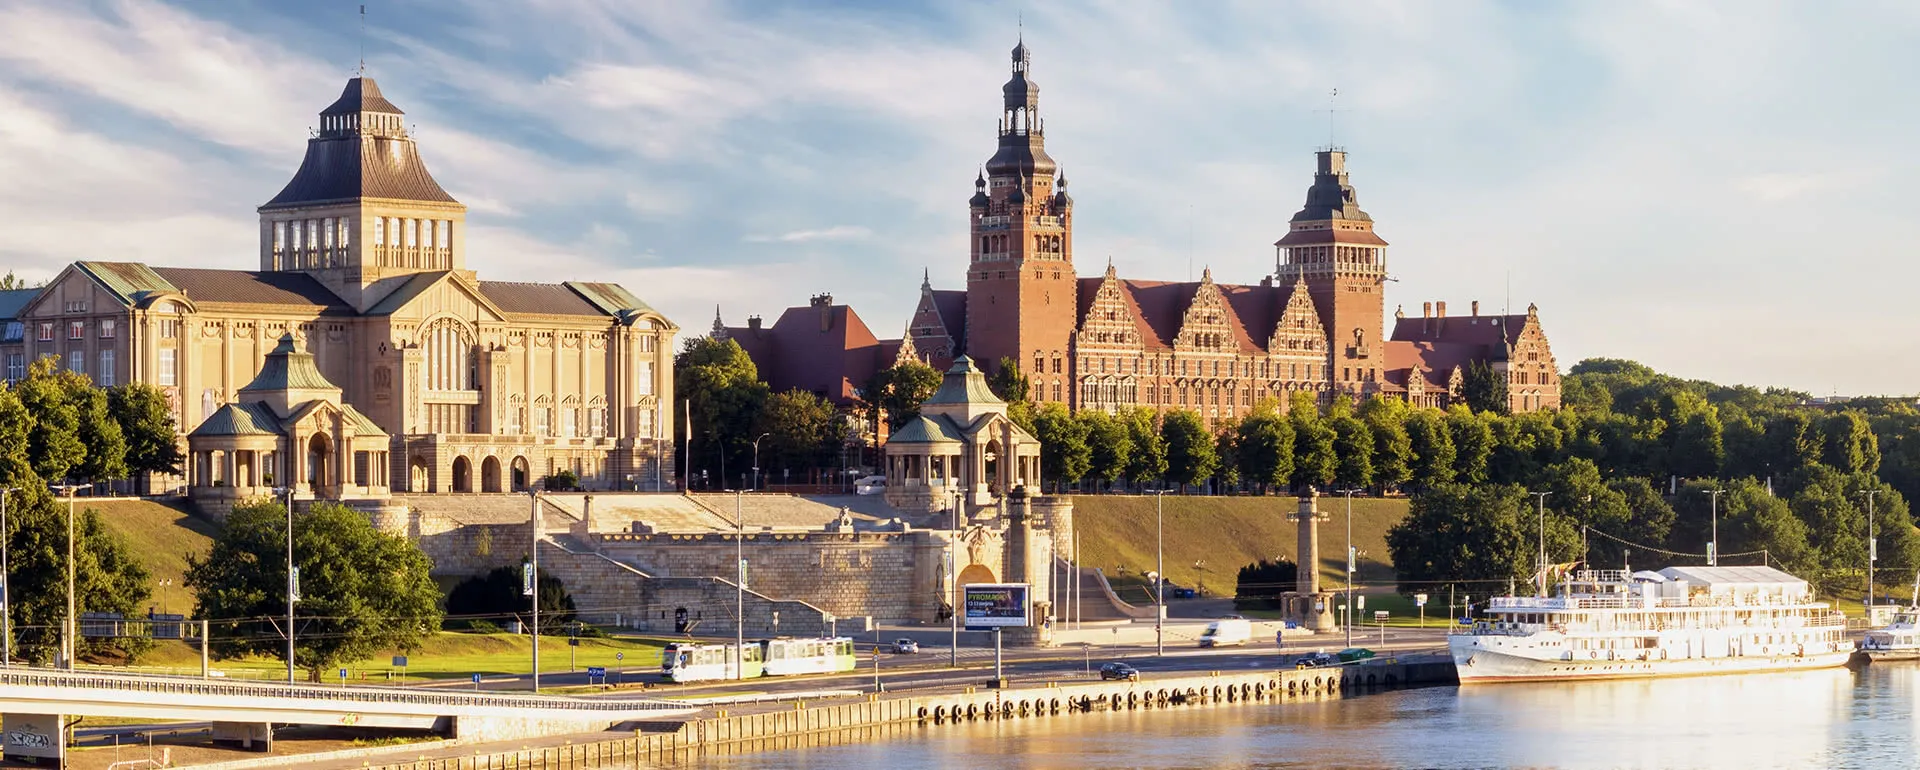 Szczecin - the destination with youth hostels